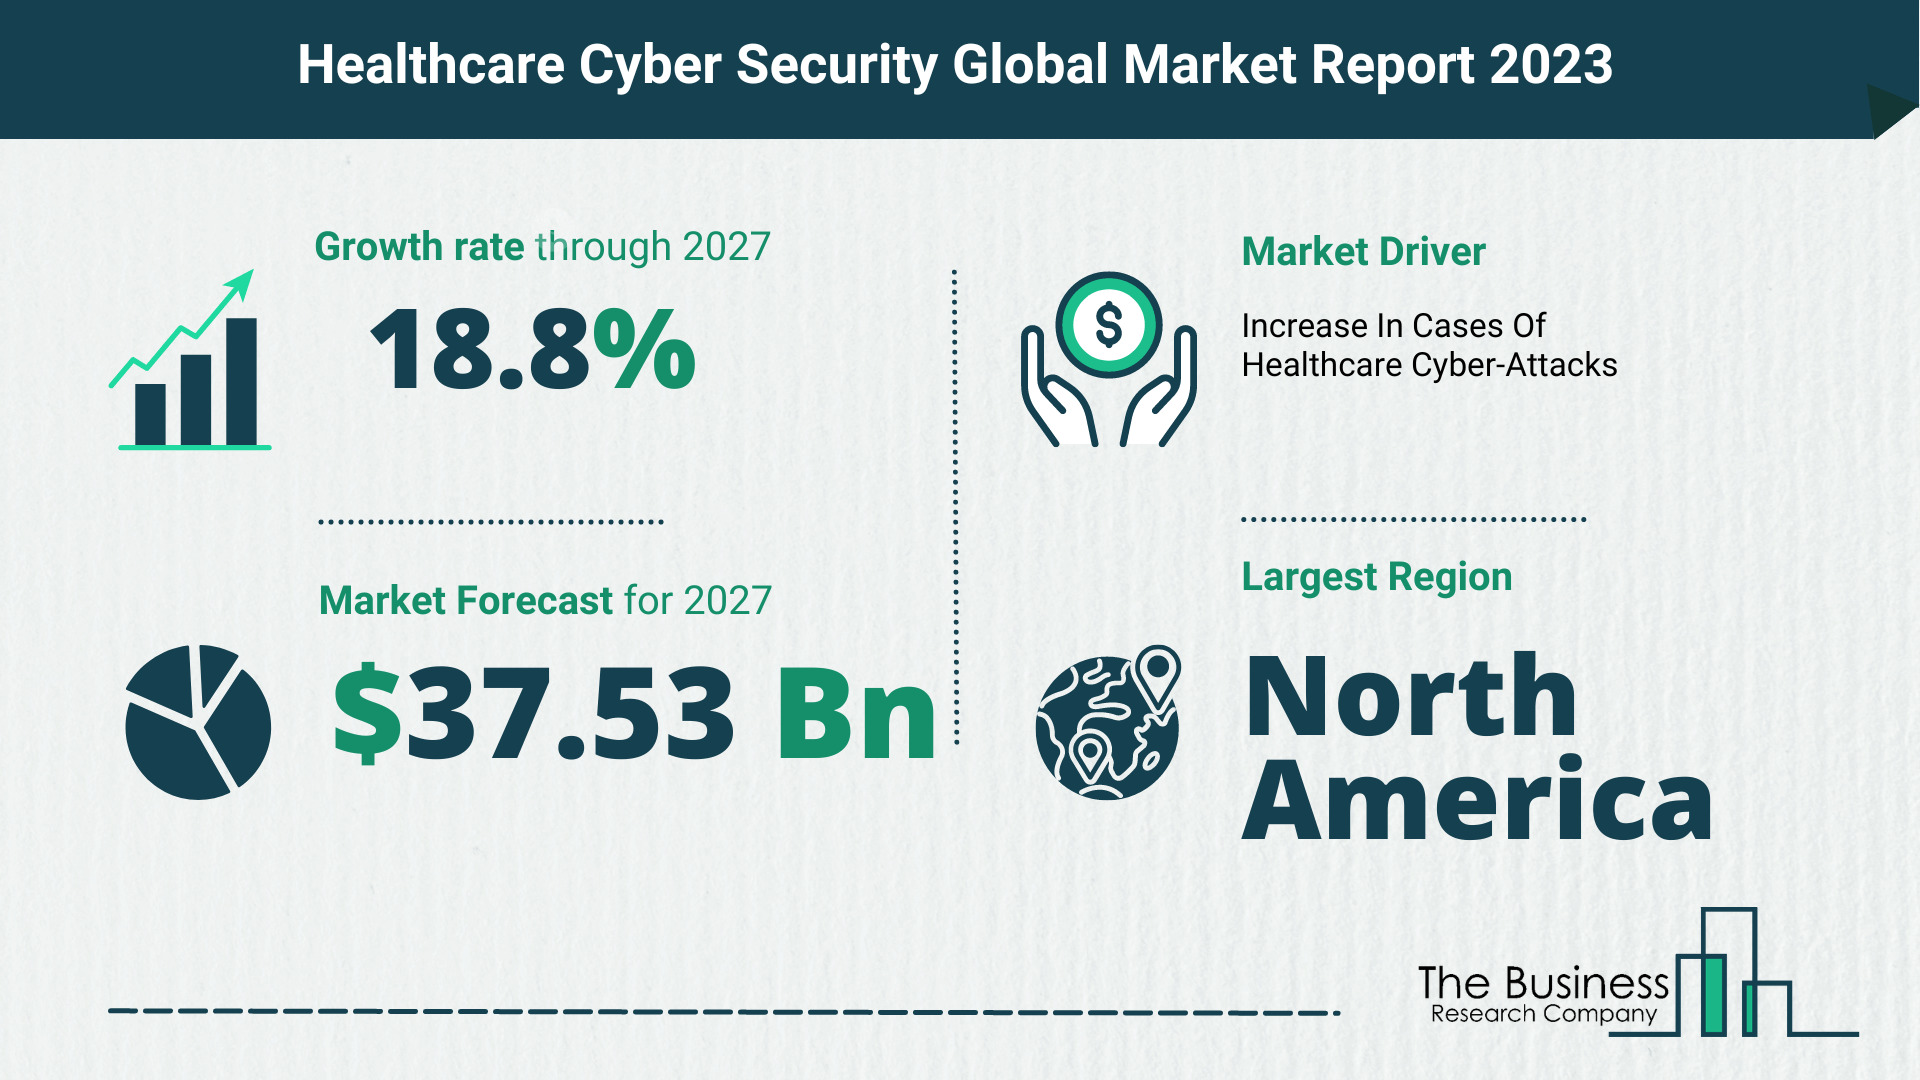 Healthcare Cyber Security Market Size, Share, And Growth Rate Analysis 2023